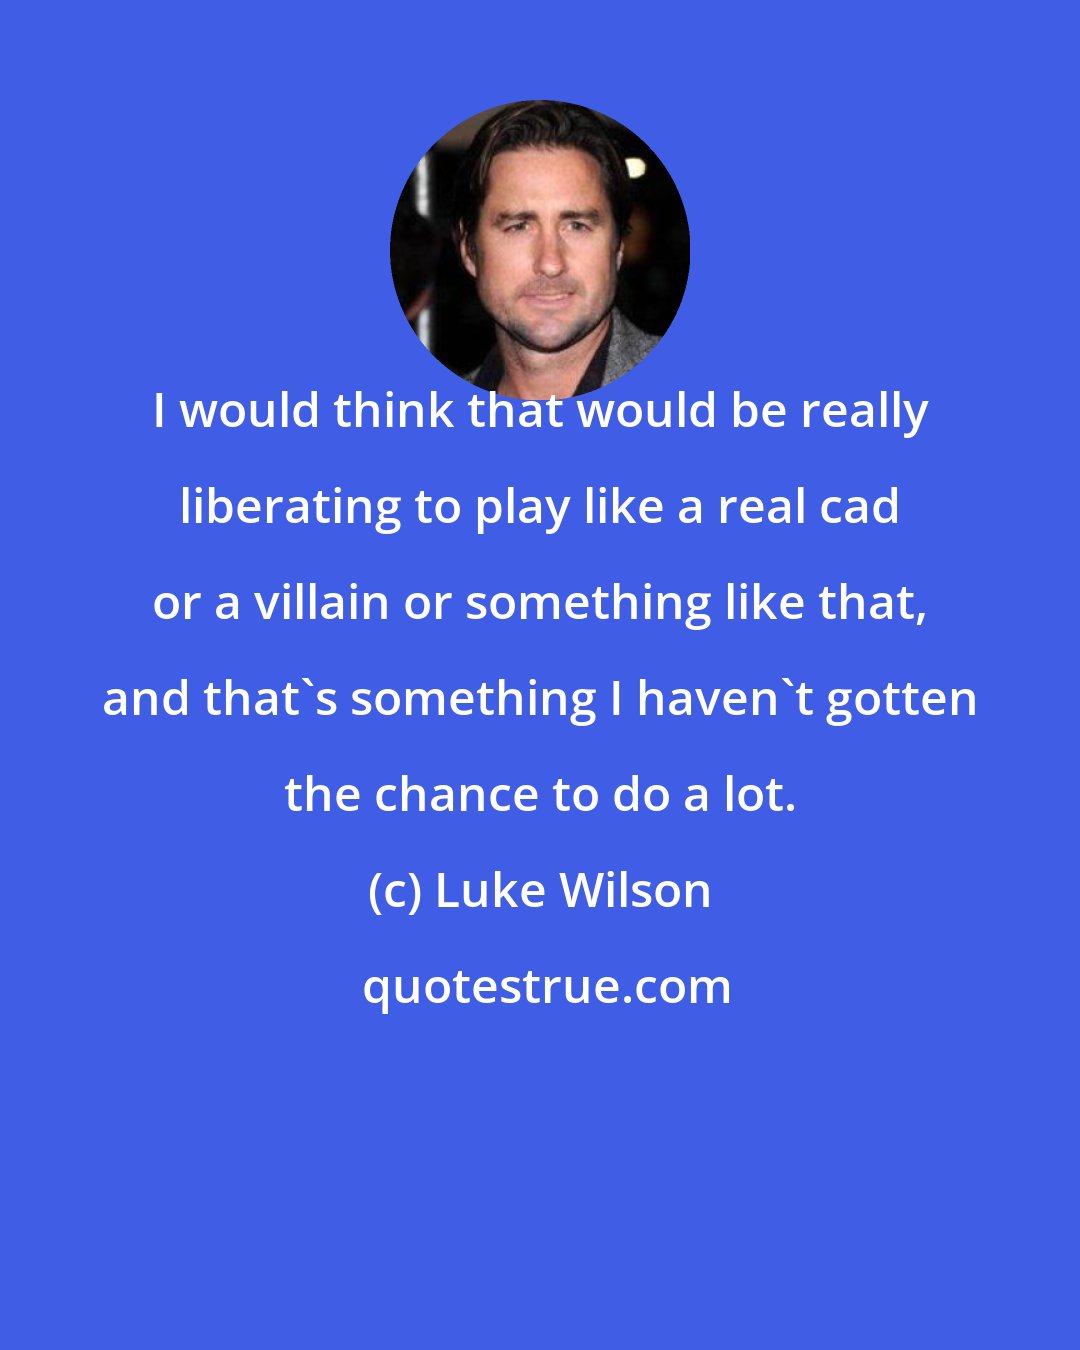 Luke Wilson: I would think that would be really liberating to play like a real cad or a villain or something like that, and that's something I haven't gotten the chance to do a lot.